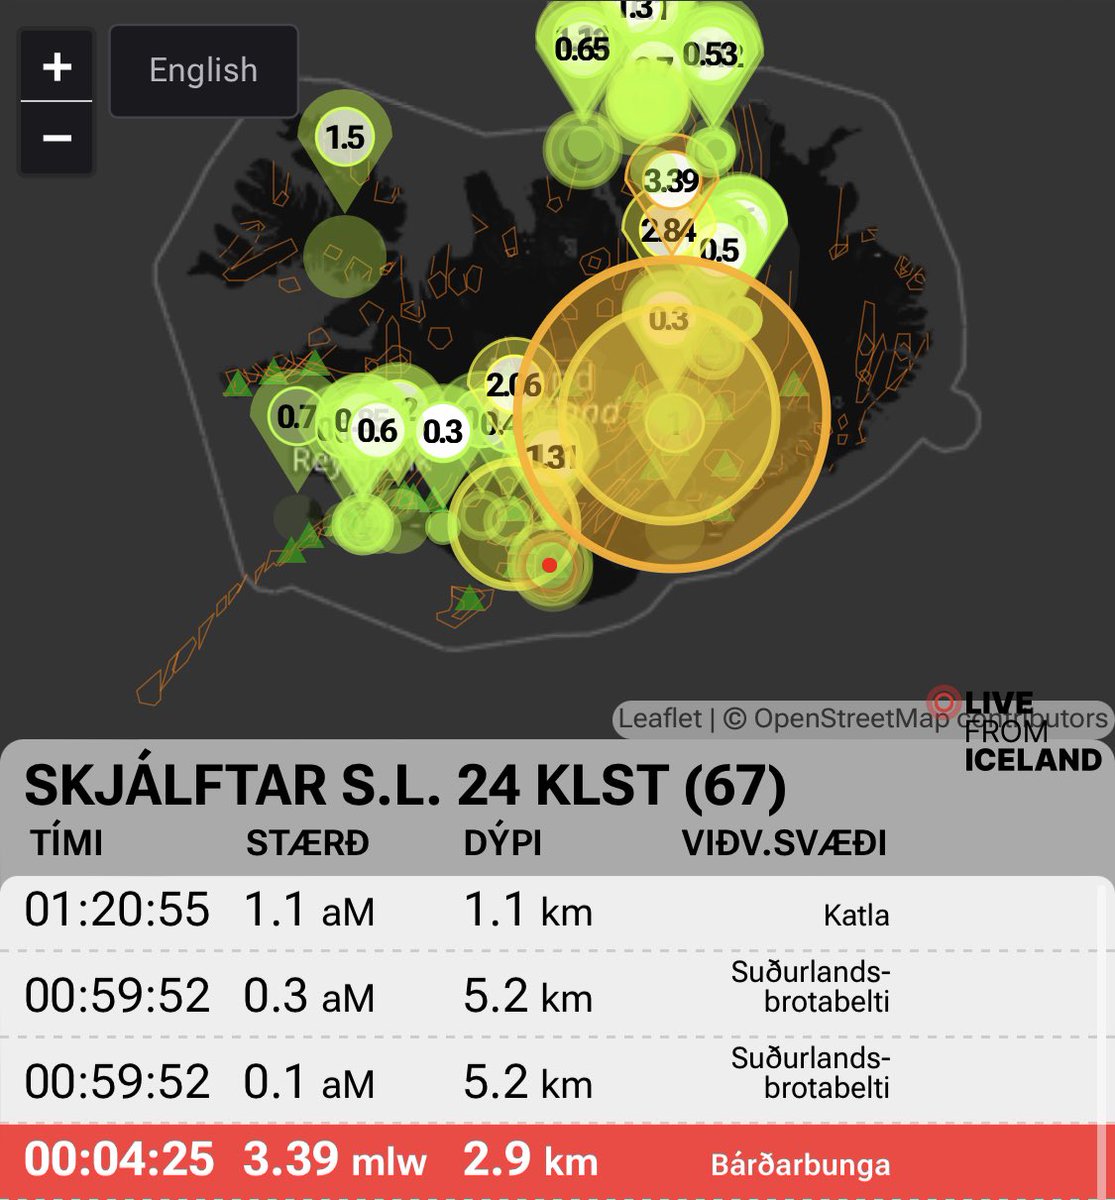 The 2.3 magnitude earthquake that stuck Barðarbunga at midnight has now been upgraded to a 3.4 magnitude earthquake 👀. No earthquakes have occurred since around the Barðarbunga area since #Iceland #Earthquake #Bardarbunga